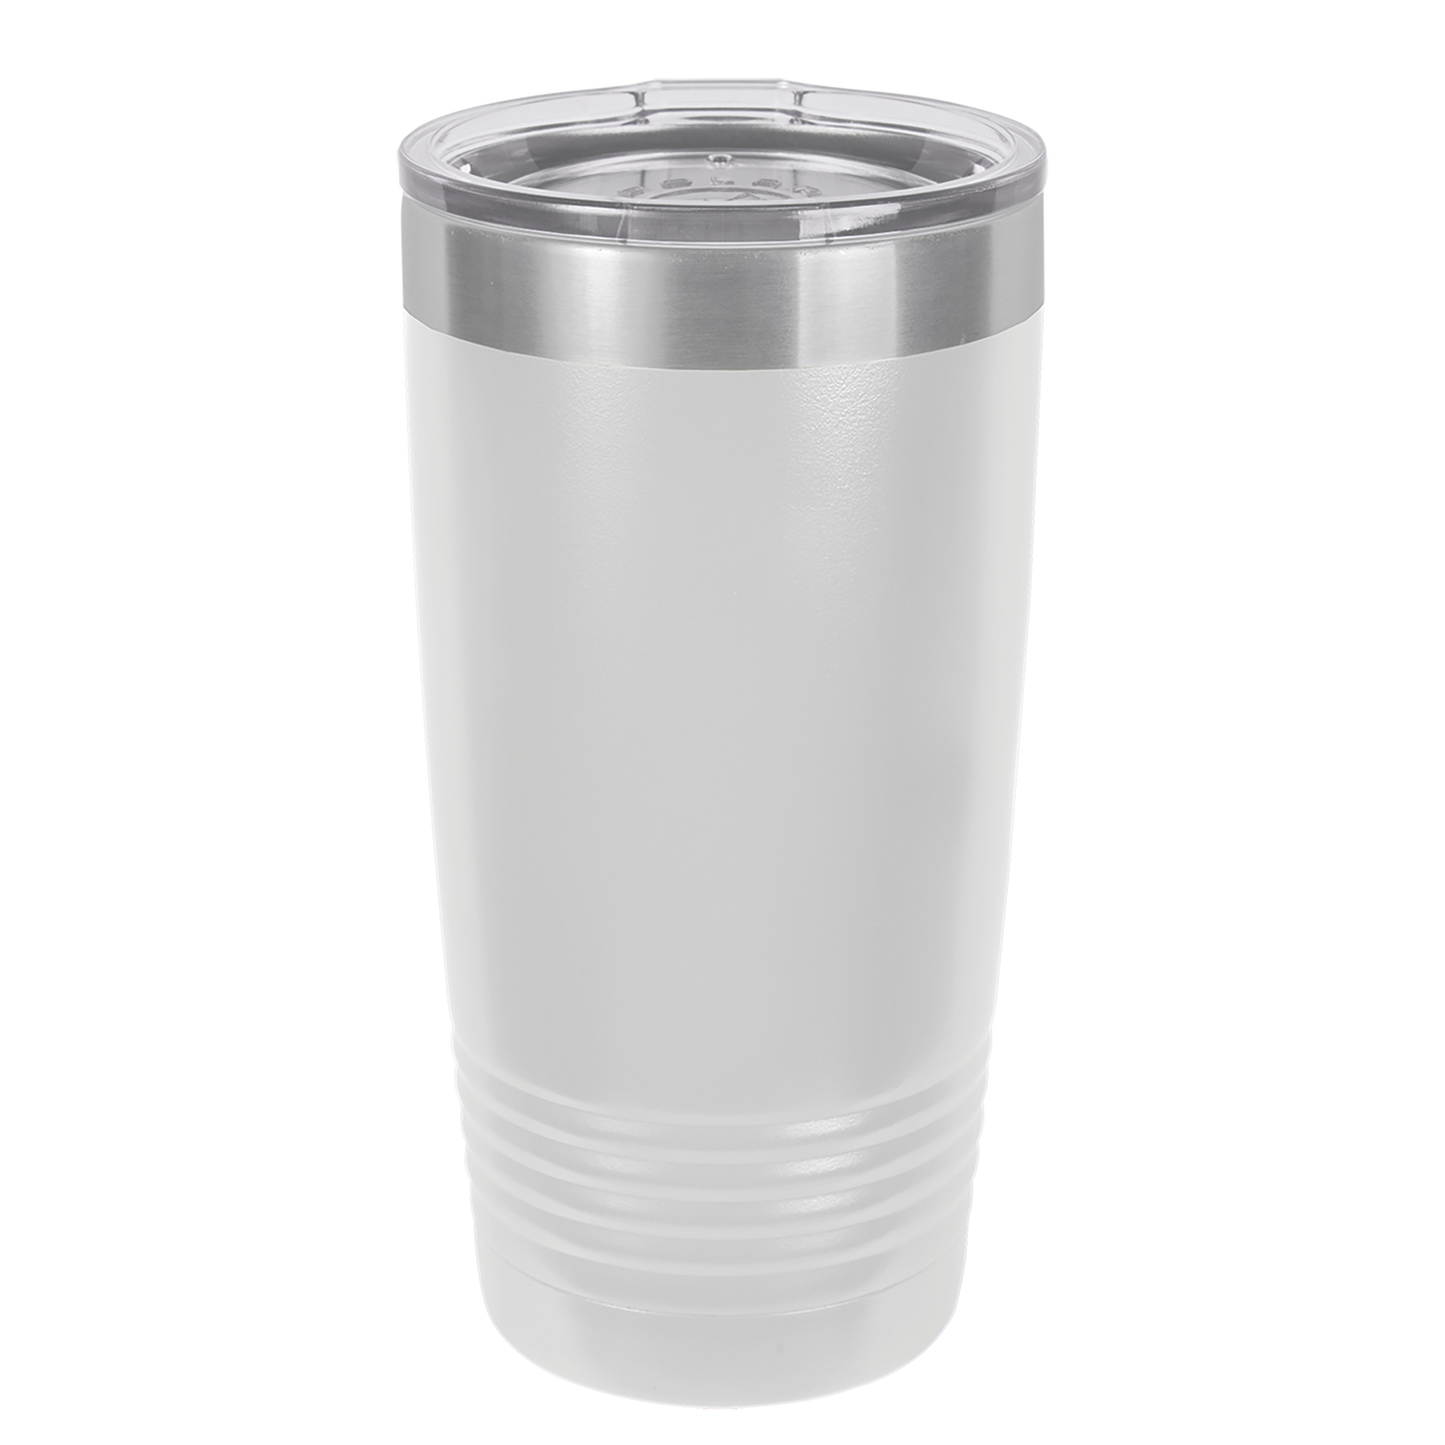 Asshole 2 - Laser Engraved Stainless Steel Drinkware - 1060 -